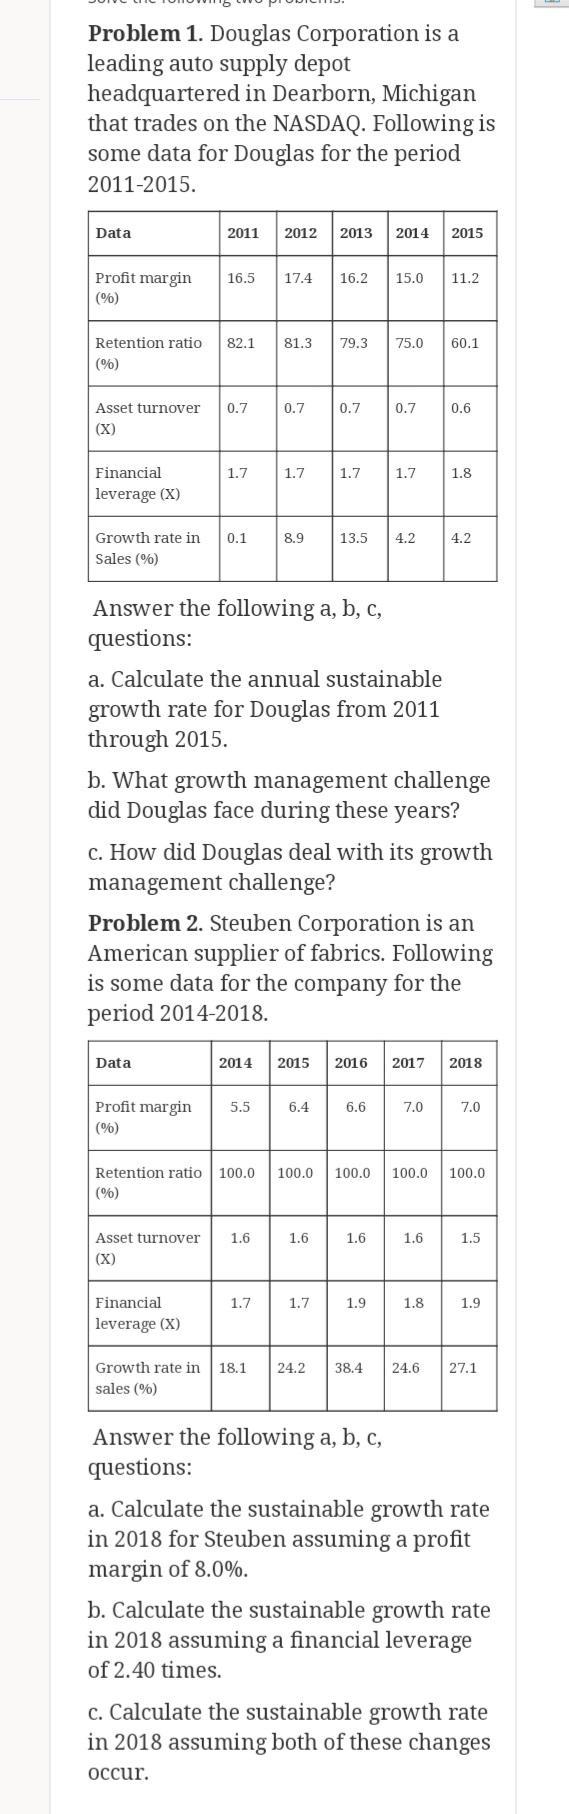 Problem 1. Douglas Corporation is a leading auto supply depot headquartered in Dearborn, Michigan that trades